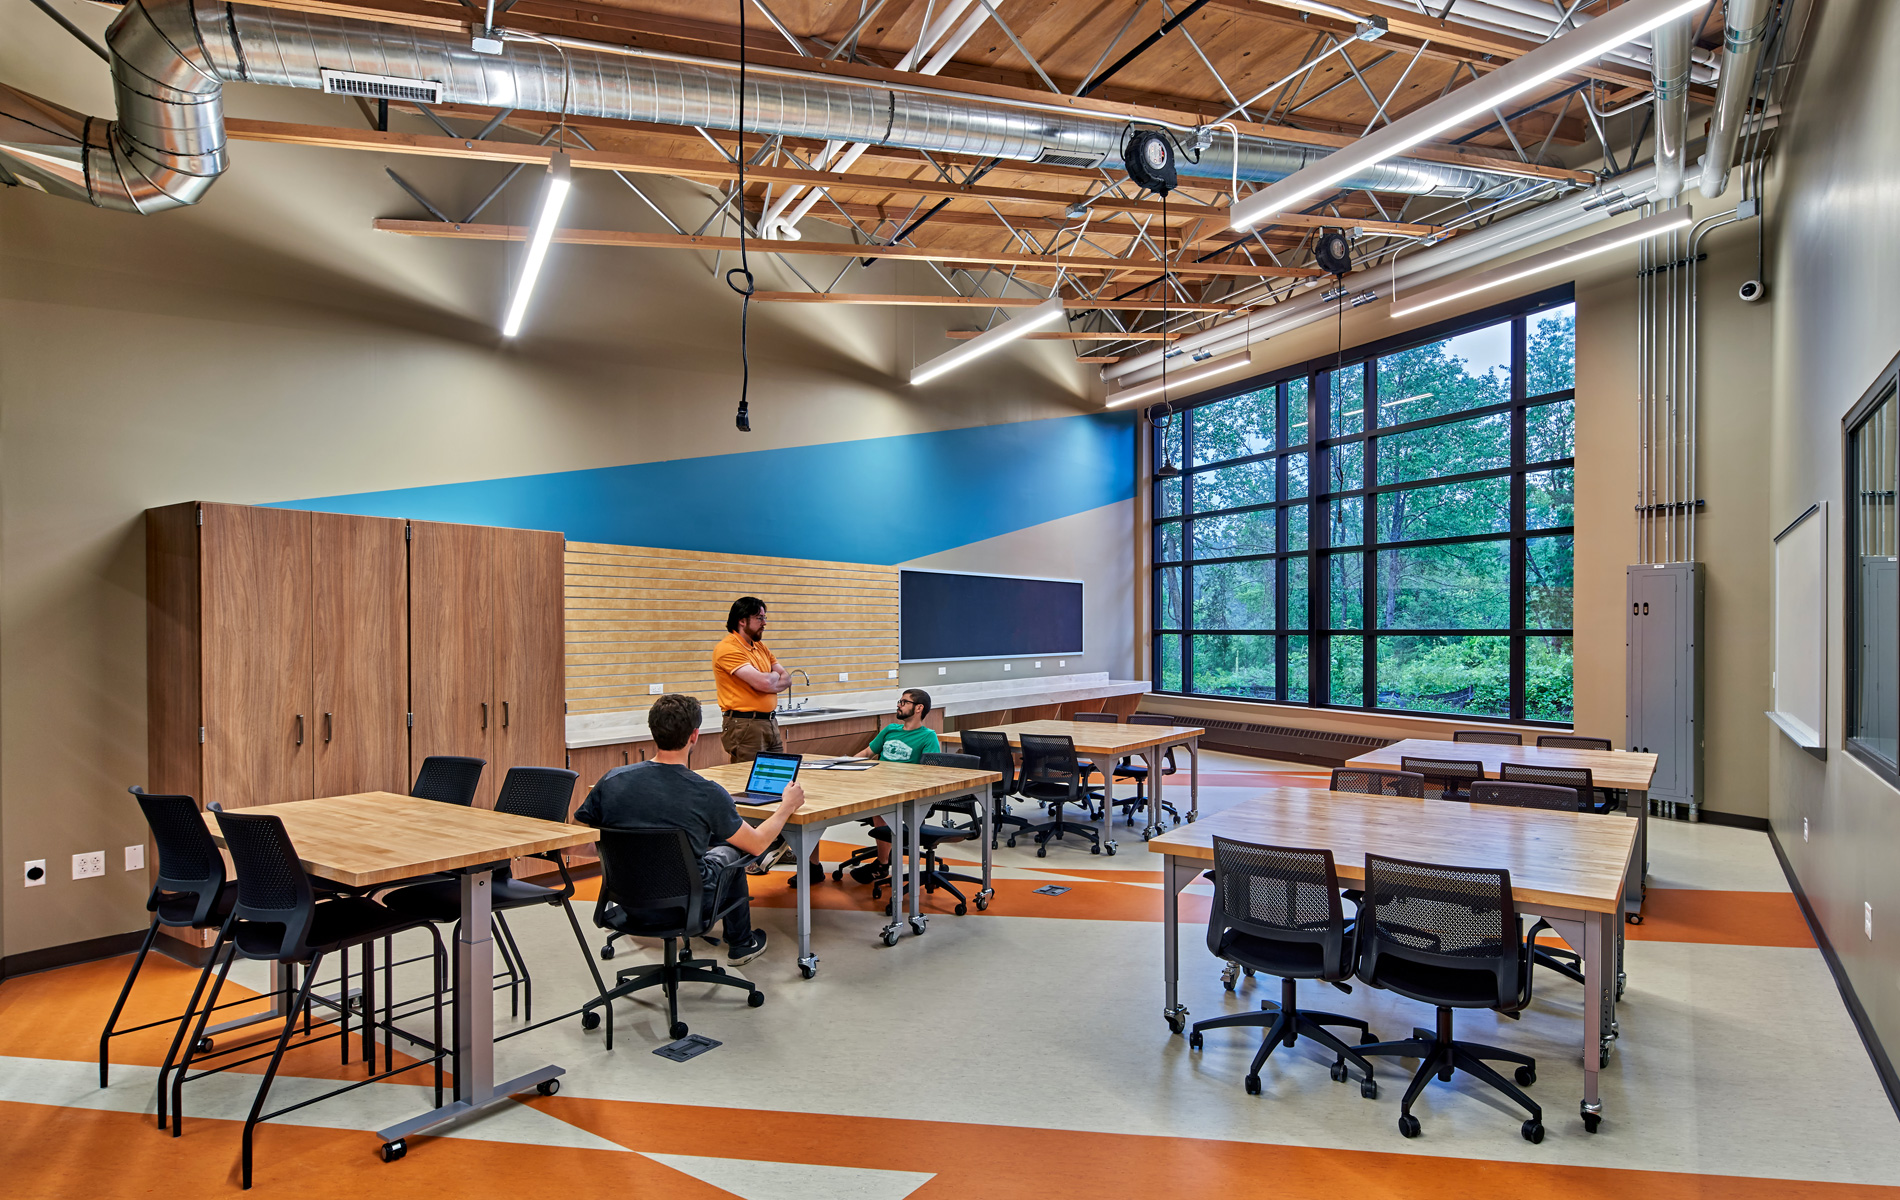 Image of the Interior of the library showing the Idea Lab space